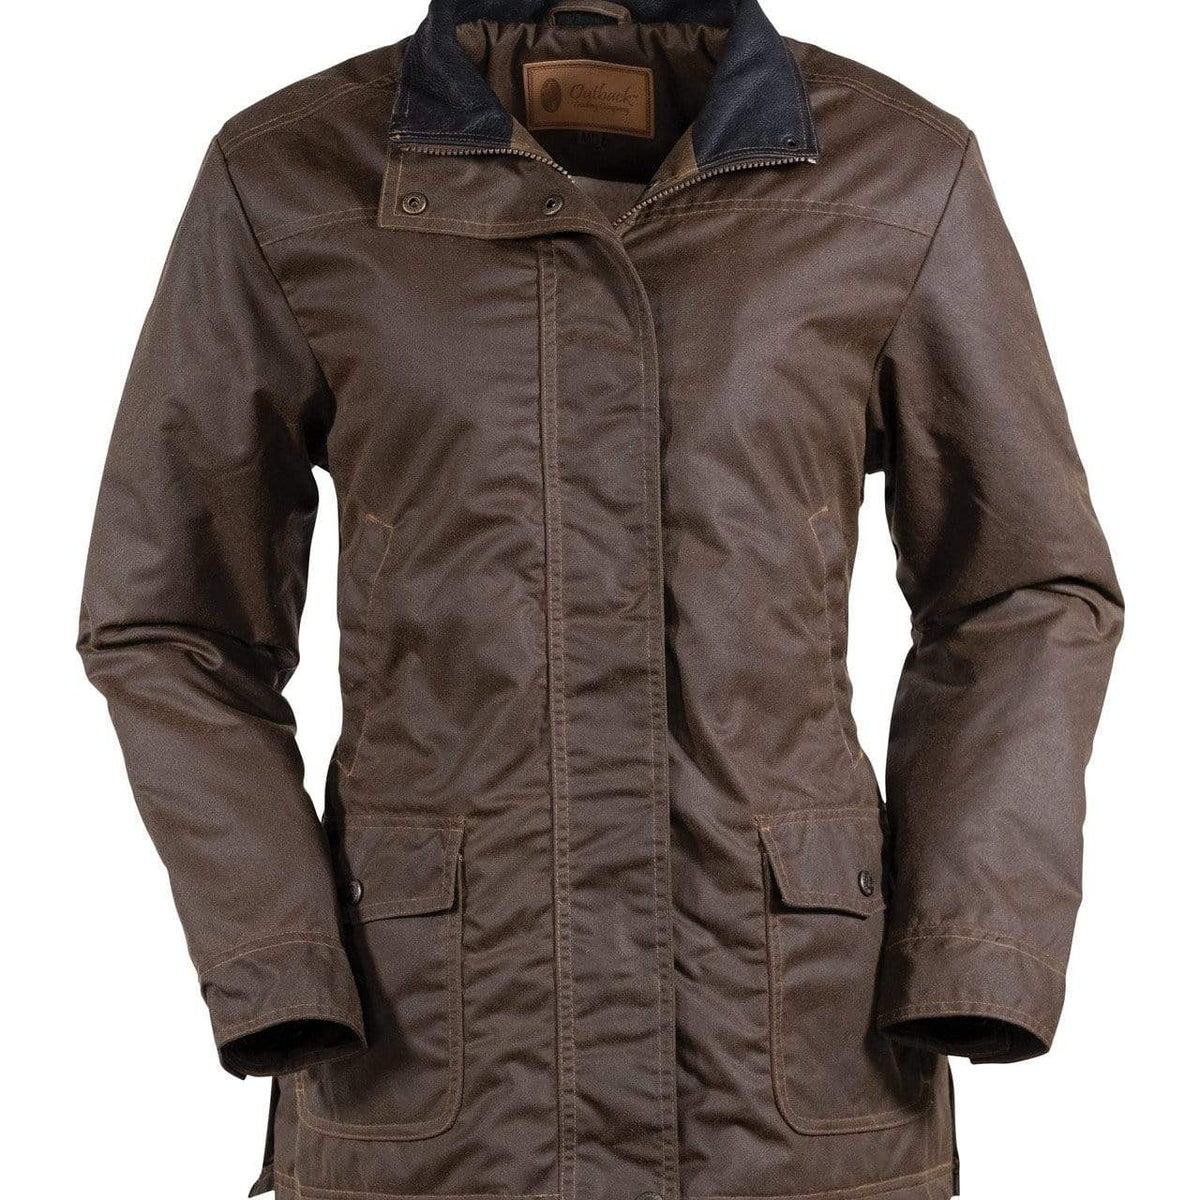 Women's Junee Jacket | Jackets by Outback Trading Company ...